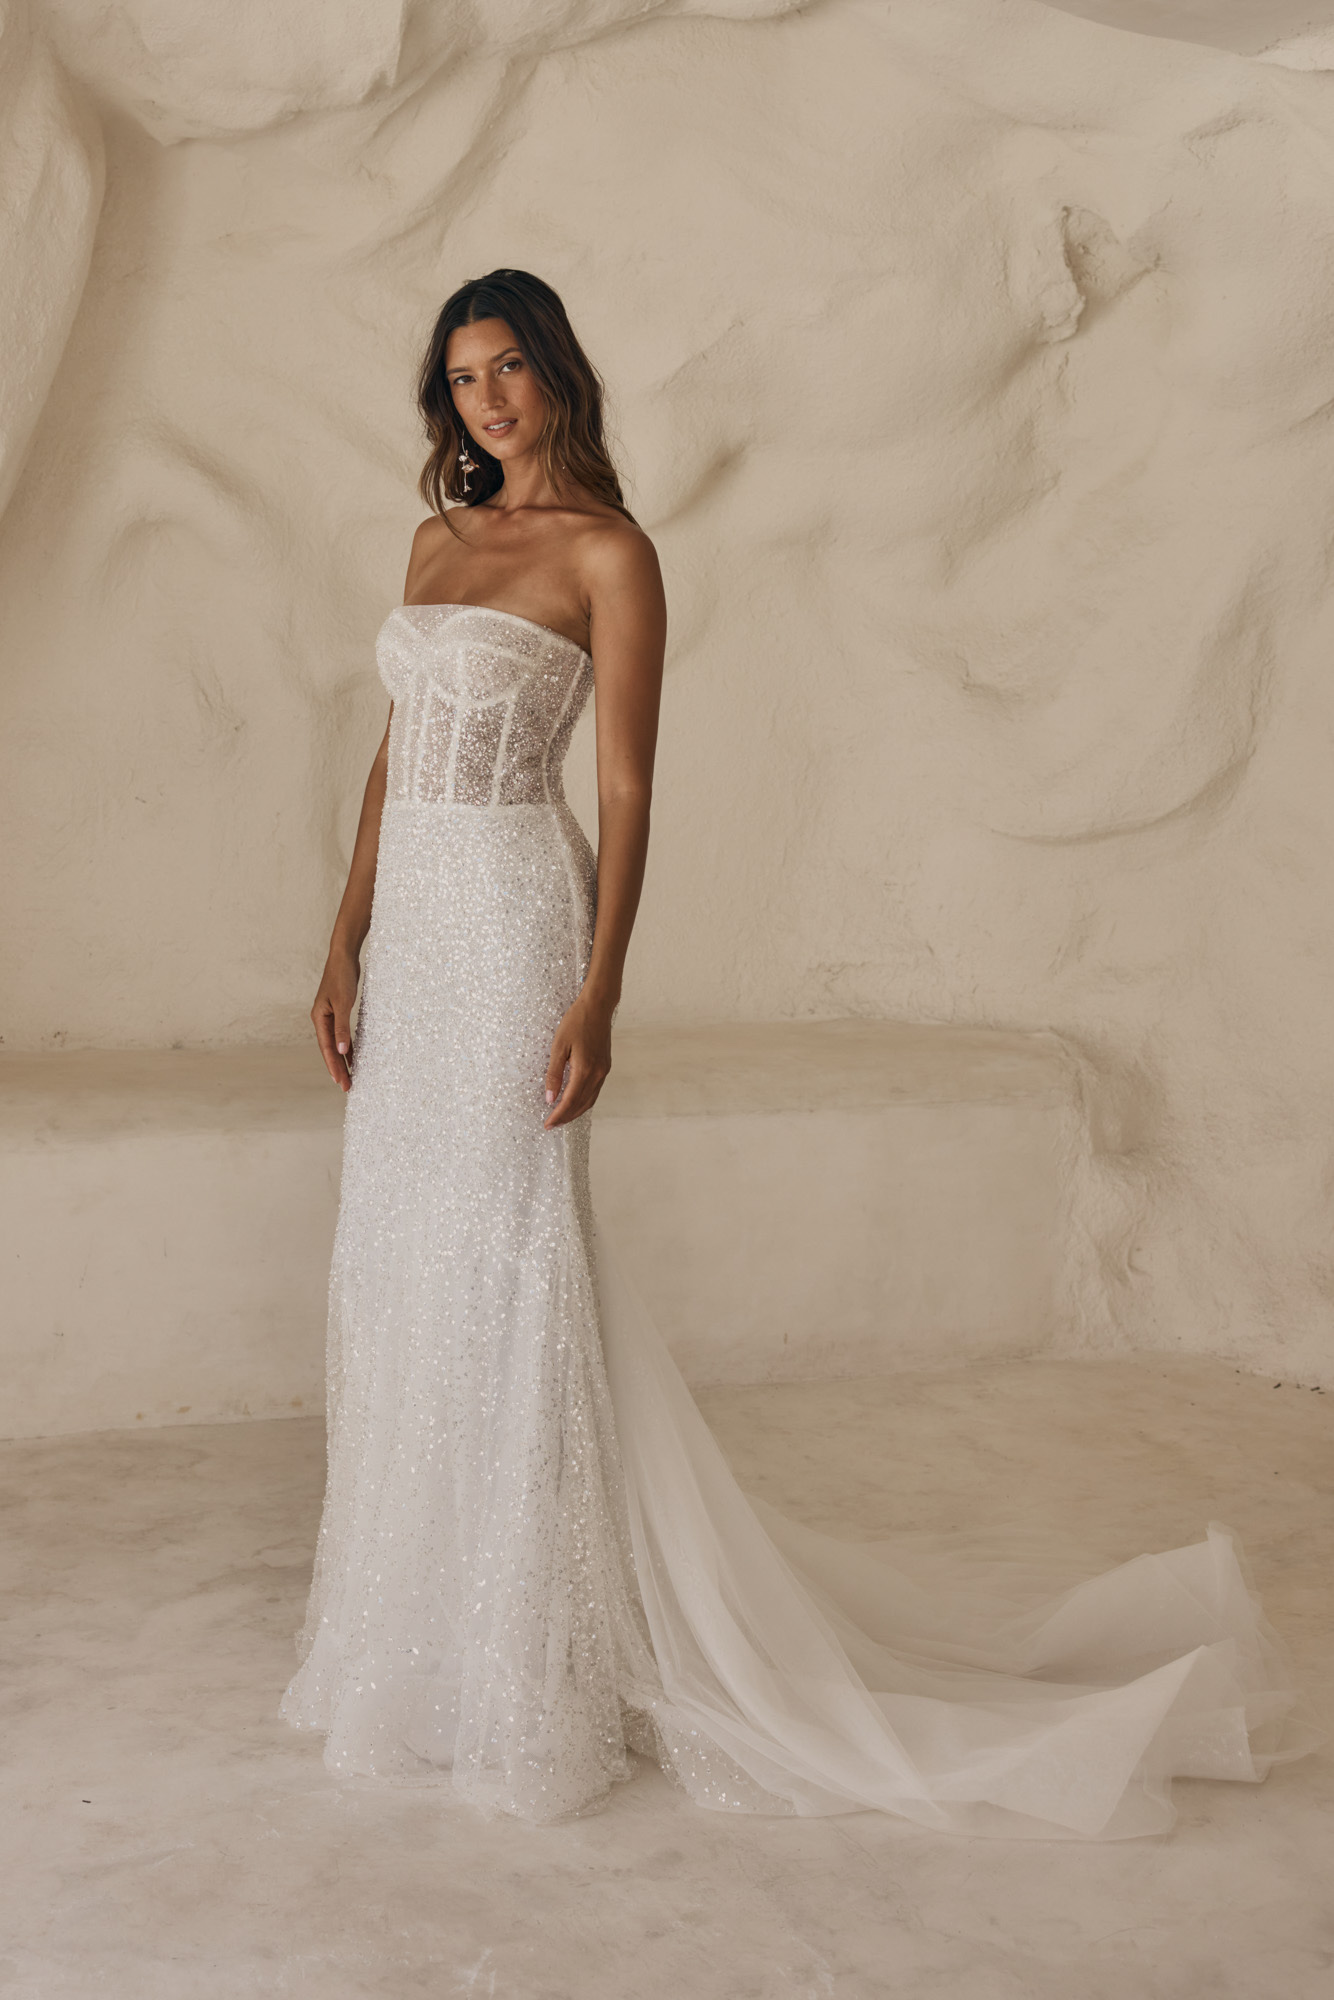 Glory of the Queen - Special Wedding Dress - Shopsy Adore